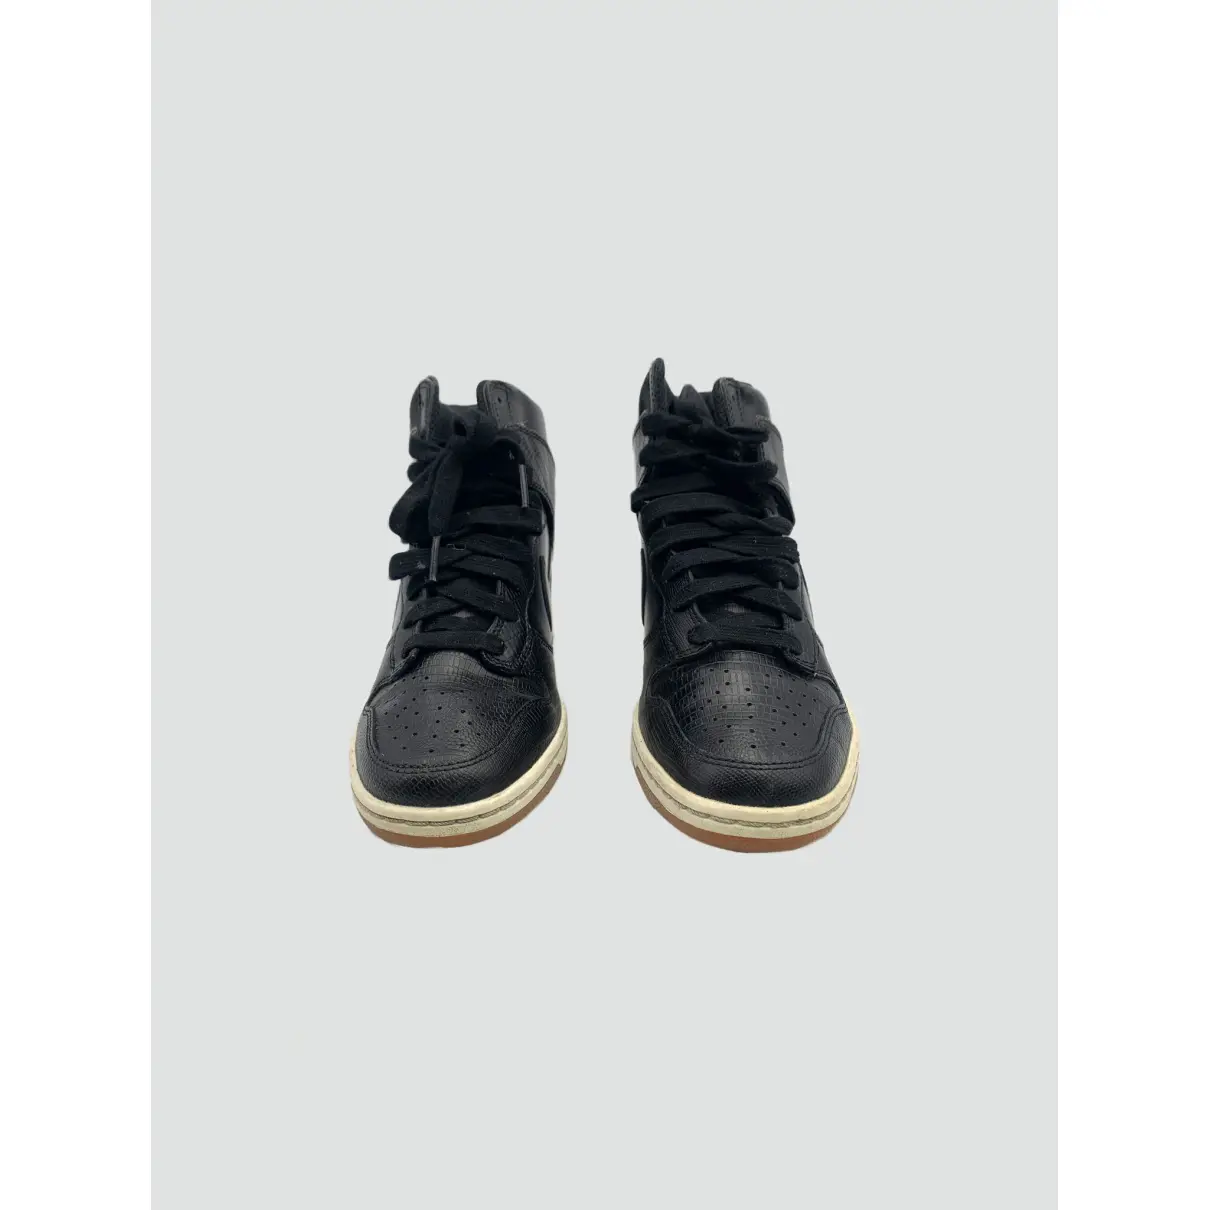 Buy Nike Dunk Sky leather trainers online